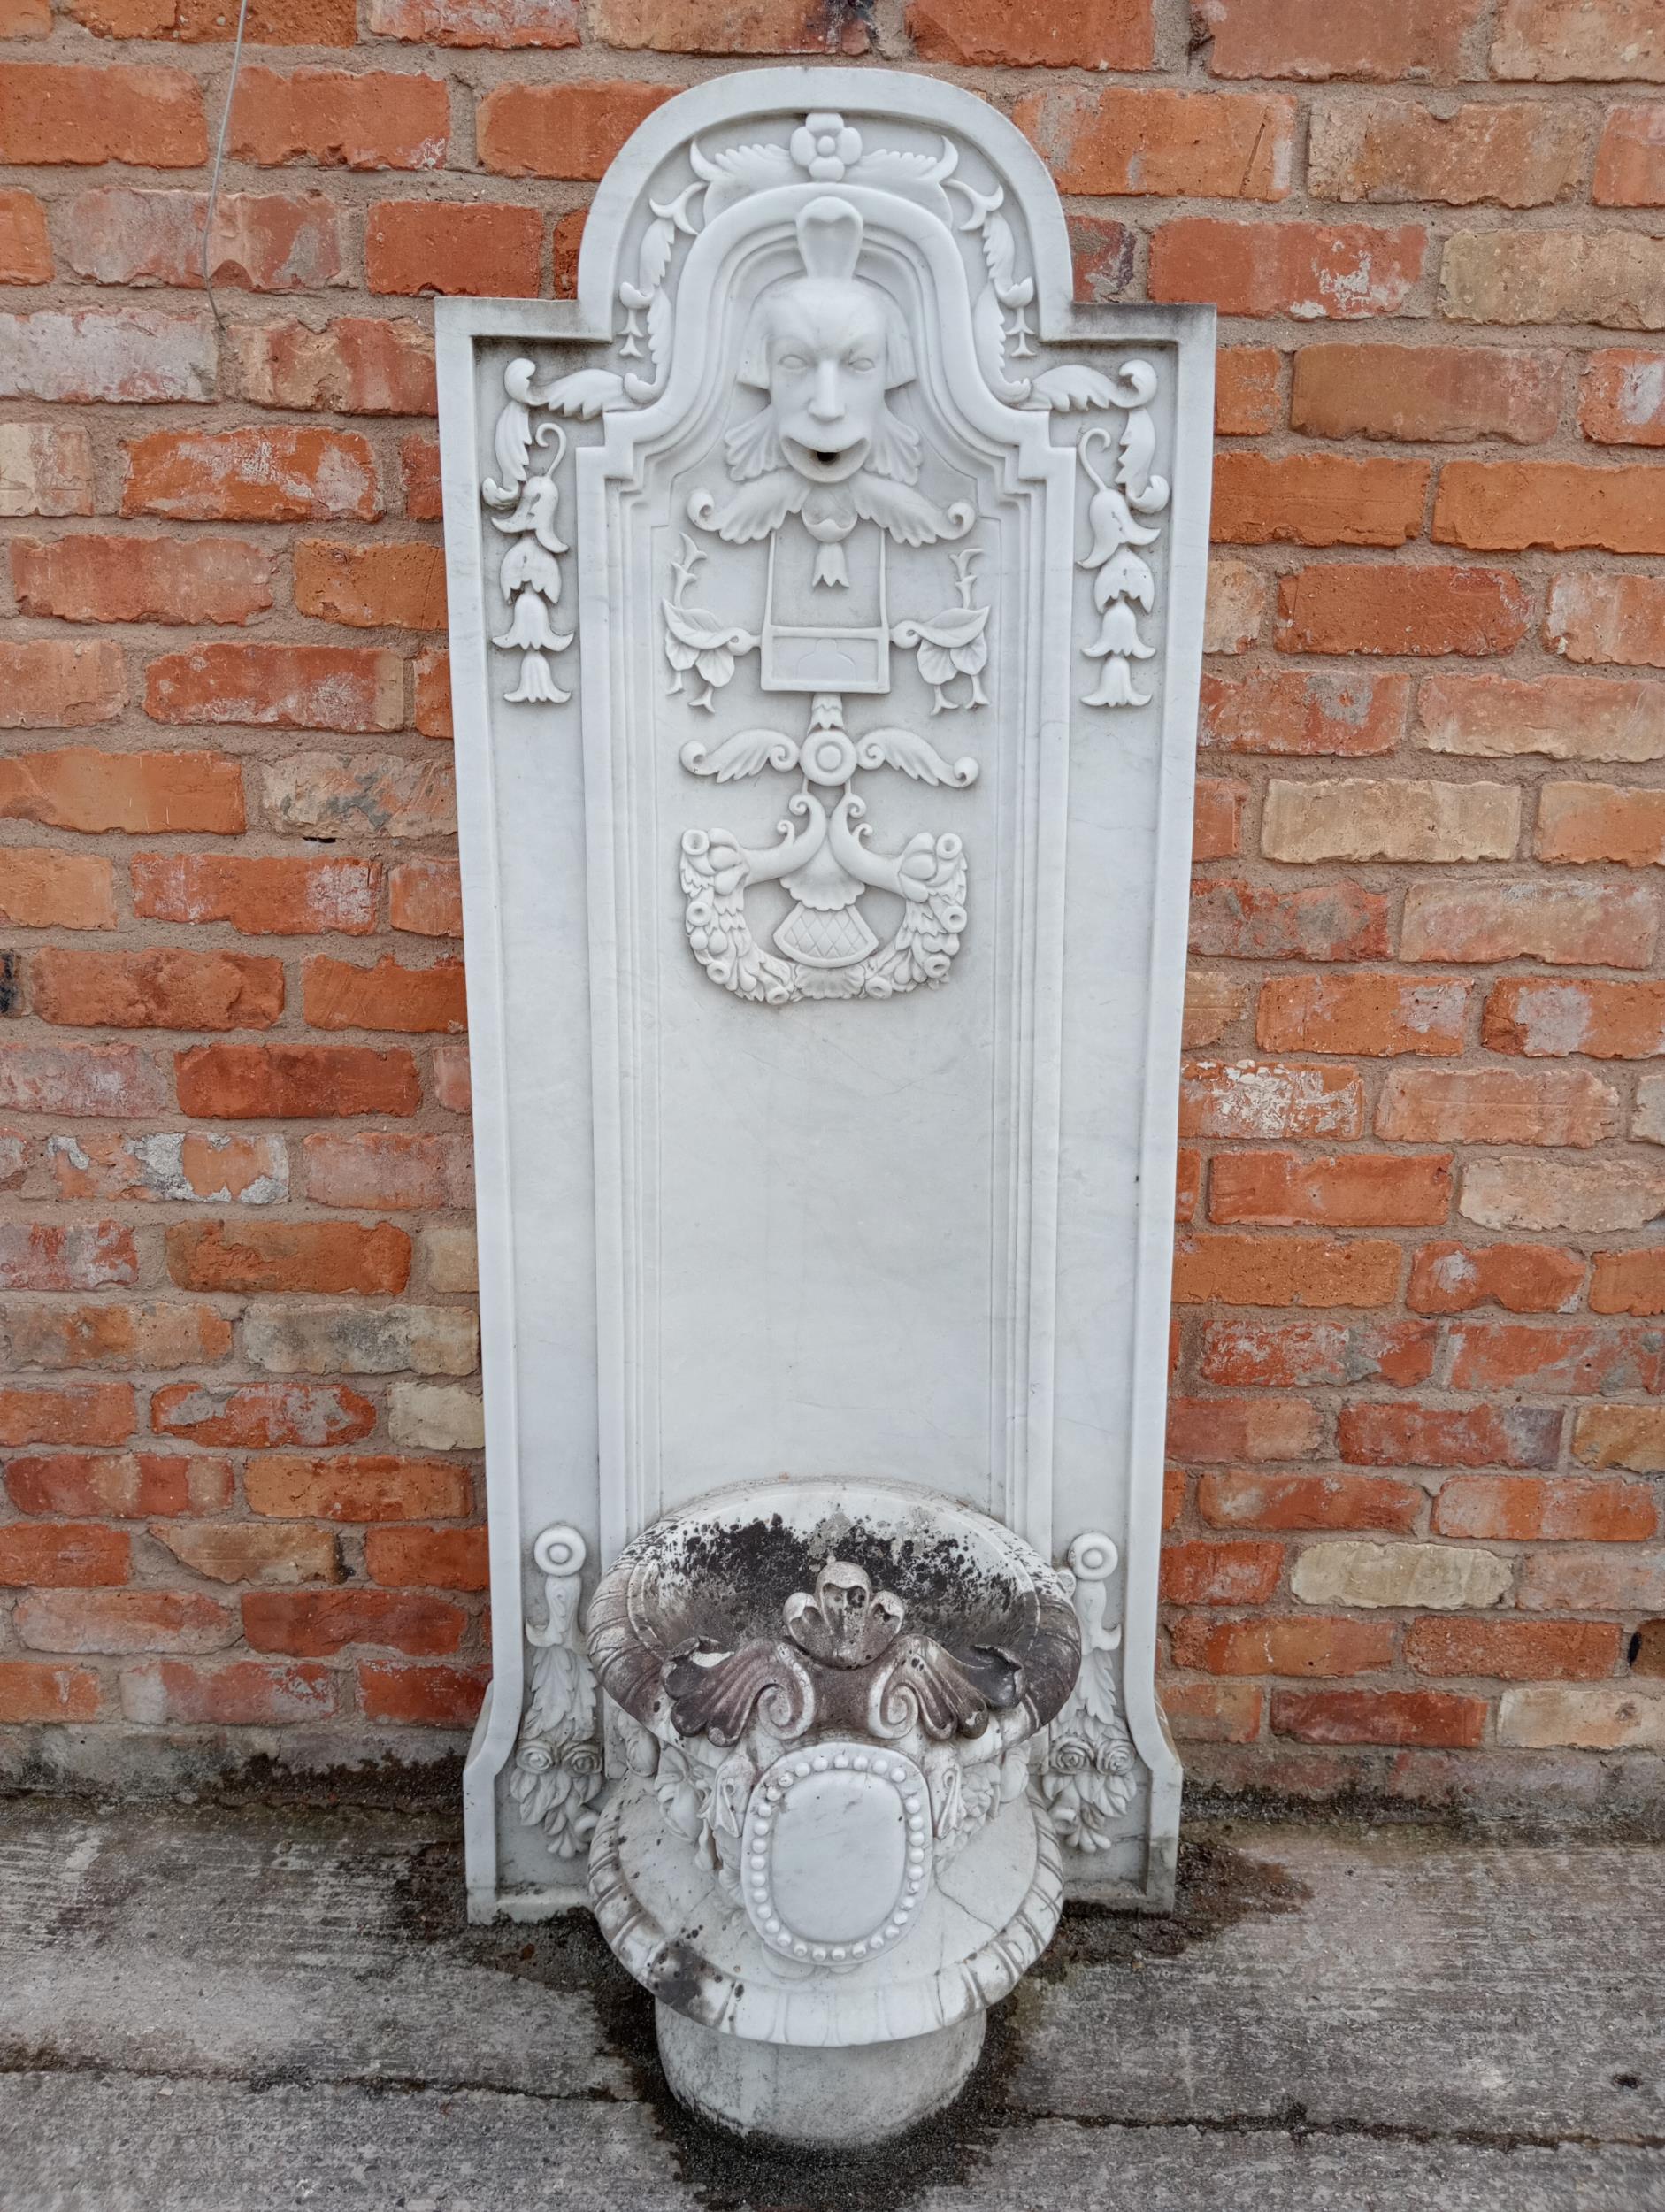 Decorative marble wall water fountain {H 160cm x W 60cm x D 50cm }. (NOT AVAILABLE TO VIEW IN